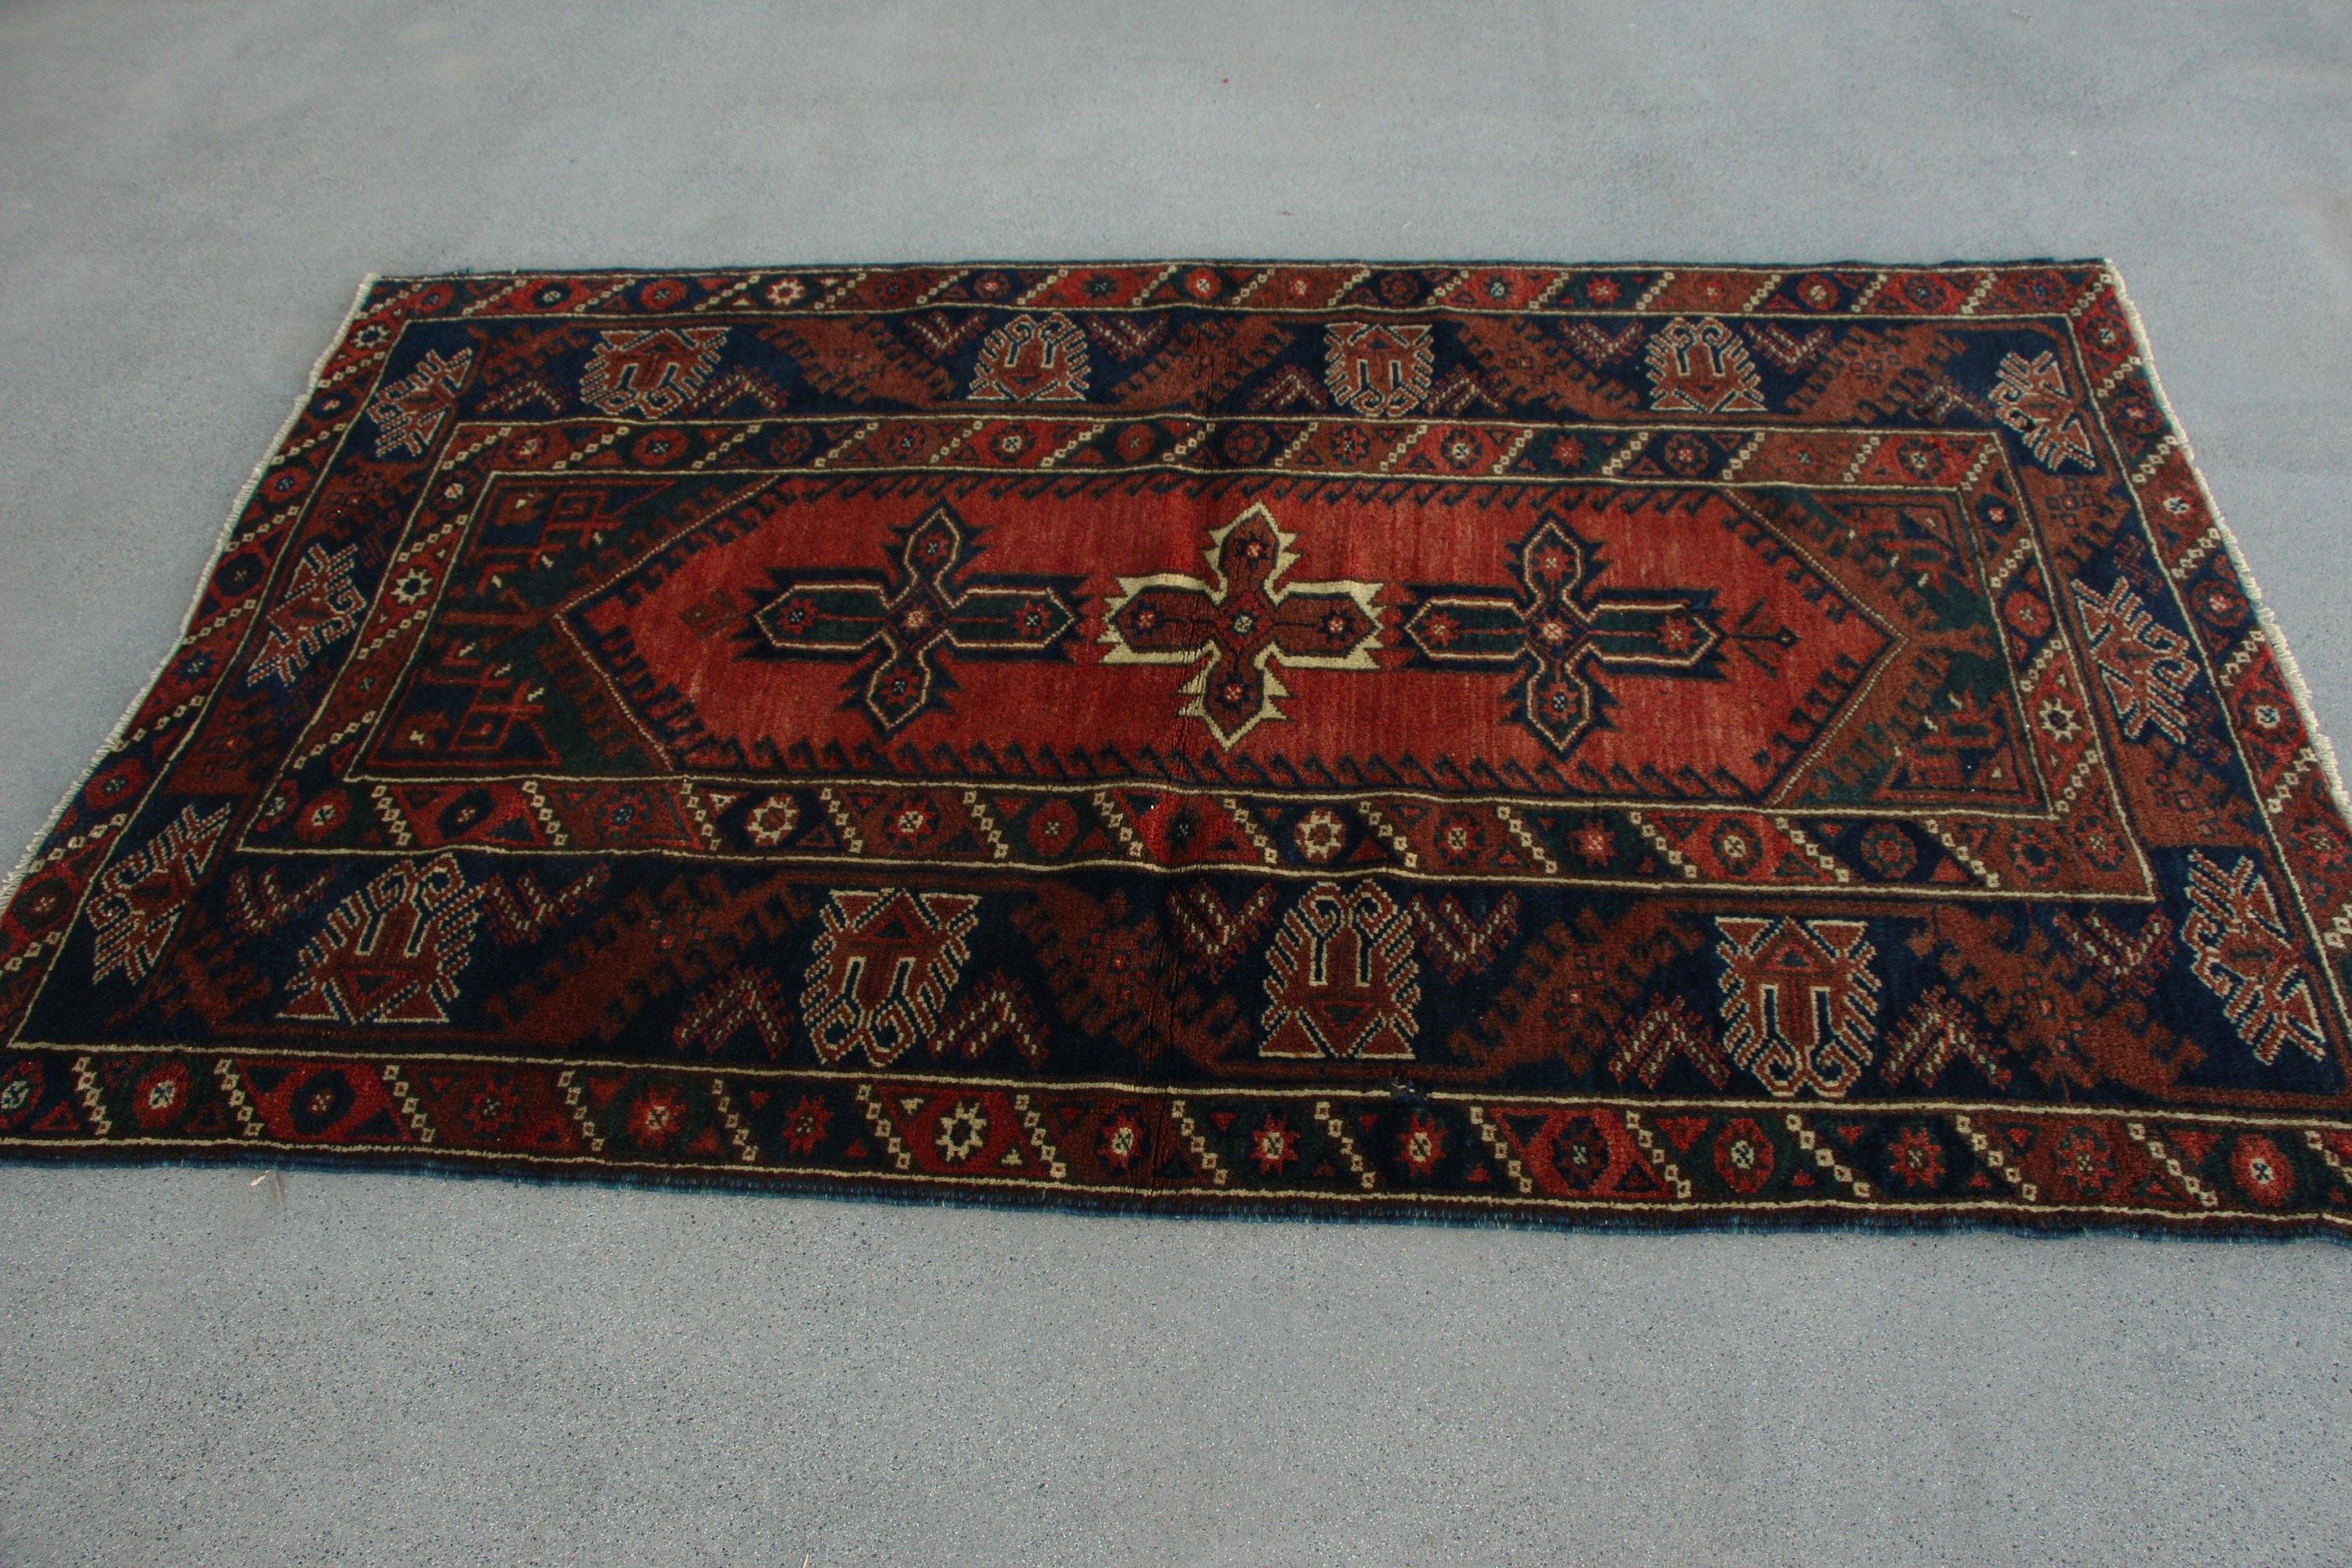 Antique Rug, 3.8x6.6 ft Area Rugs, Vintage Rugs, Turkish Rug, Kitchen Rugs, Rugs for Kitchen, Nursery Rug, Red Antique Rug